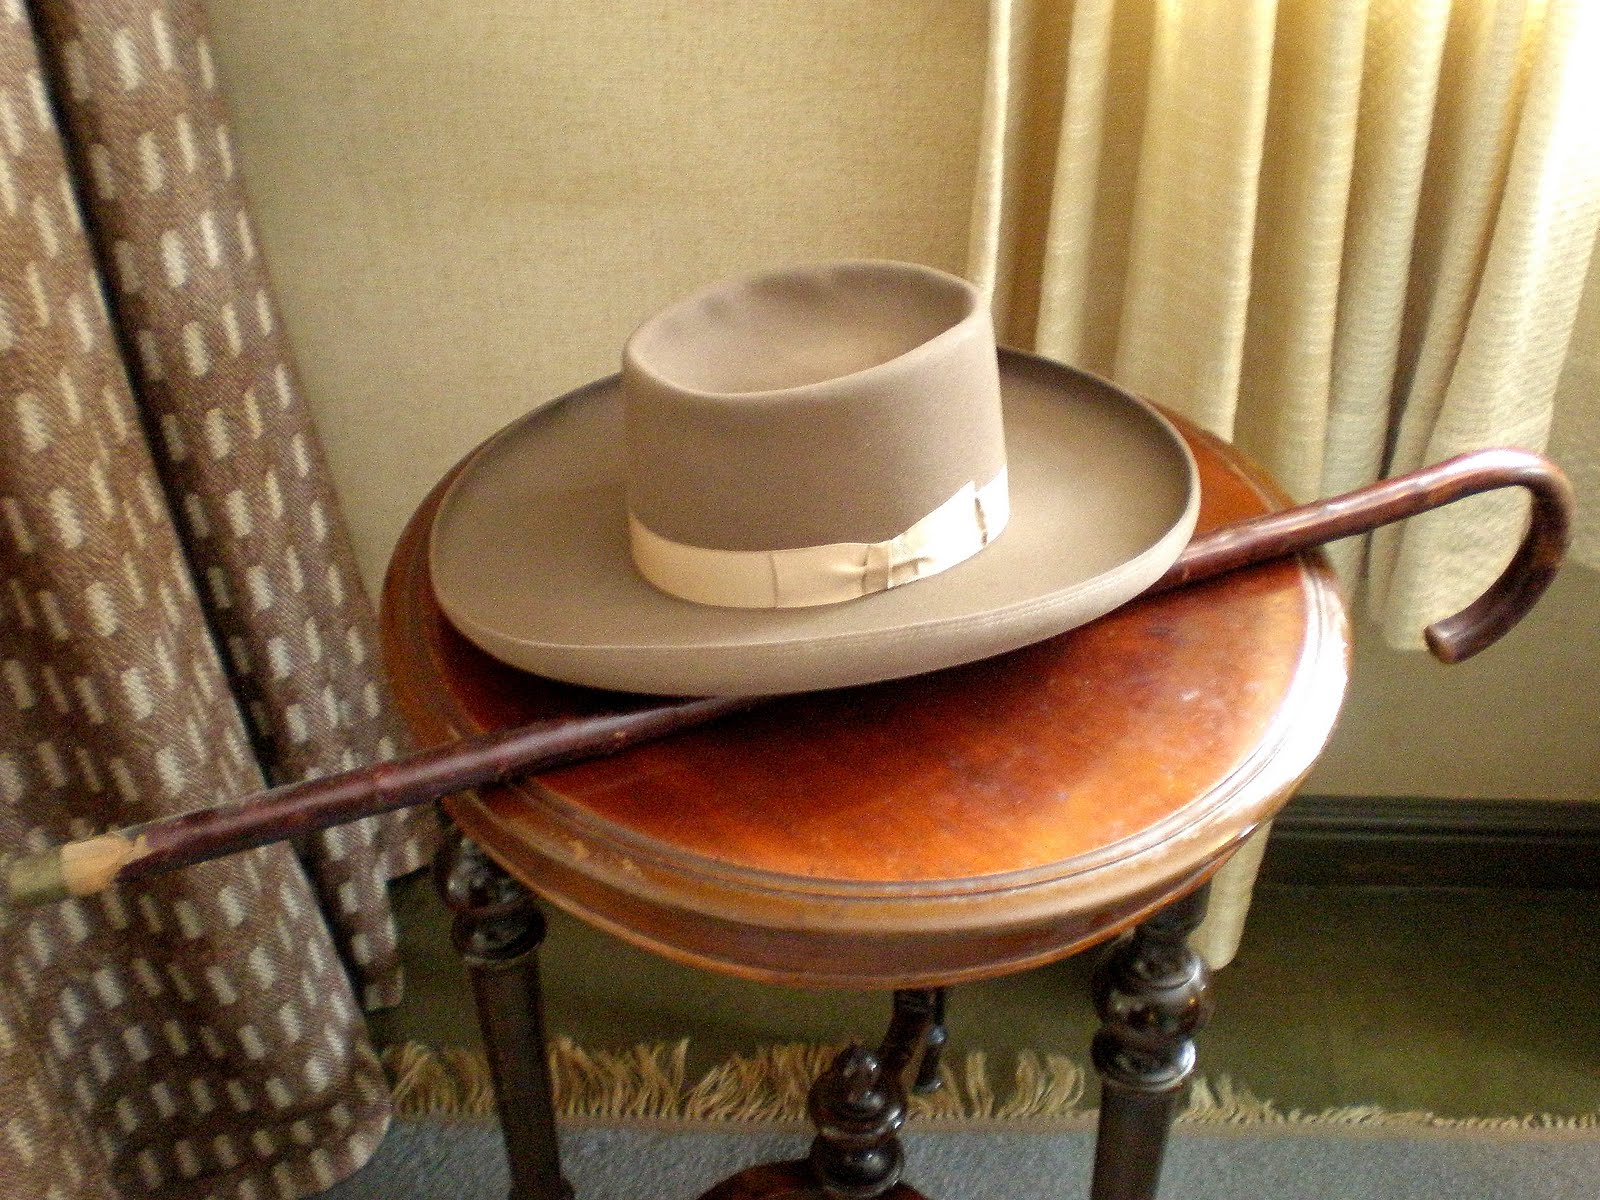 Sibelius's hat and cane at his house-museum, Ainola